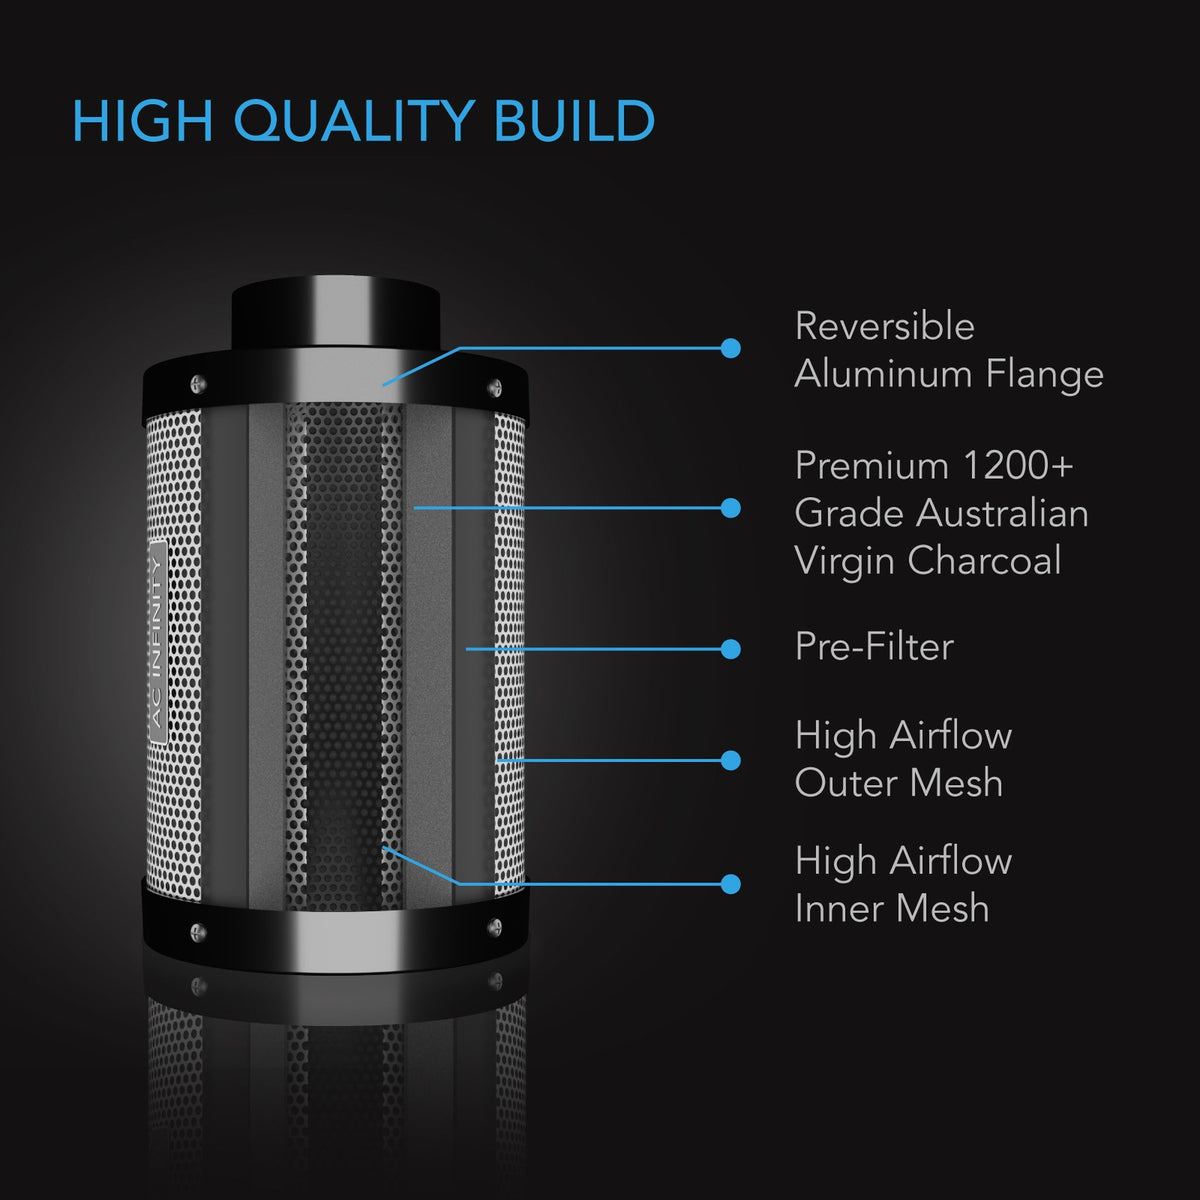 AC Infinity carbon filter details